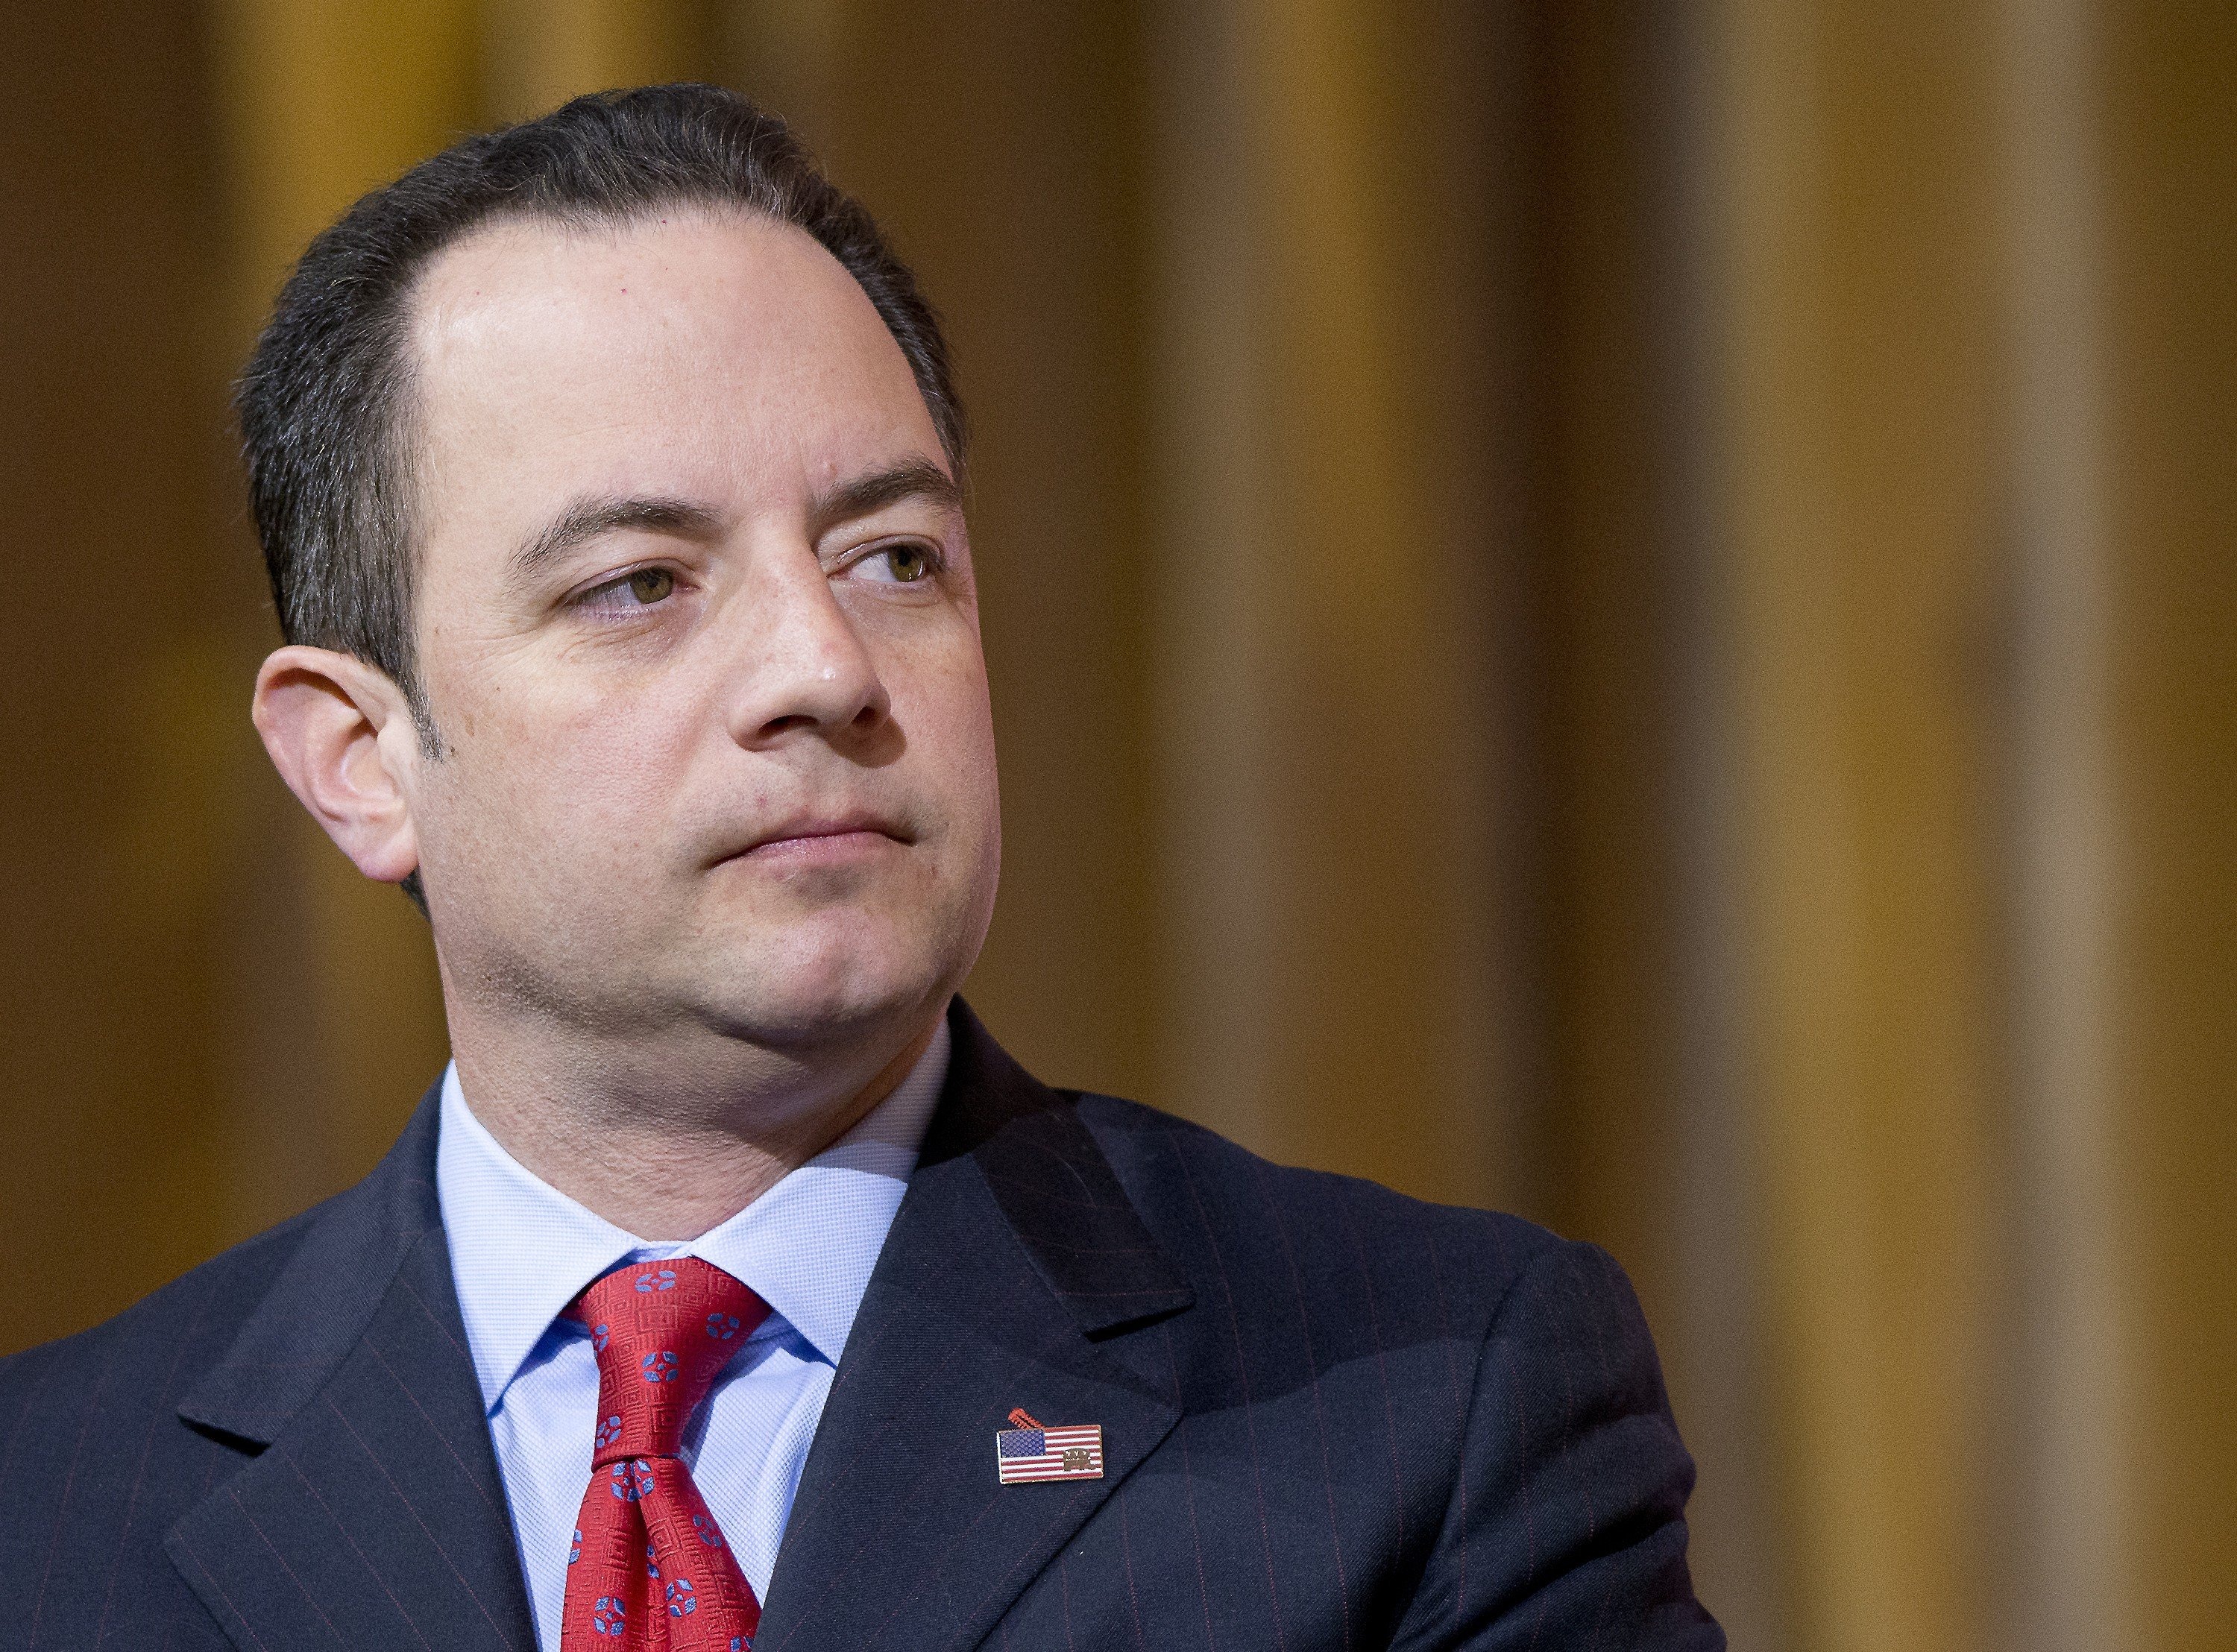 Reince Priebus, Chairman of the Republican National Committee, participates on a panel at the Conservative Political Action Conference at the Gaylord National at National Harbor, Md.